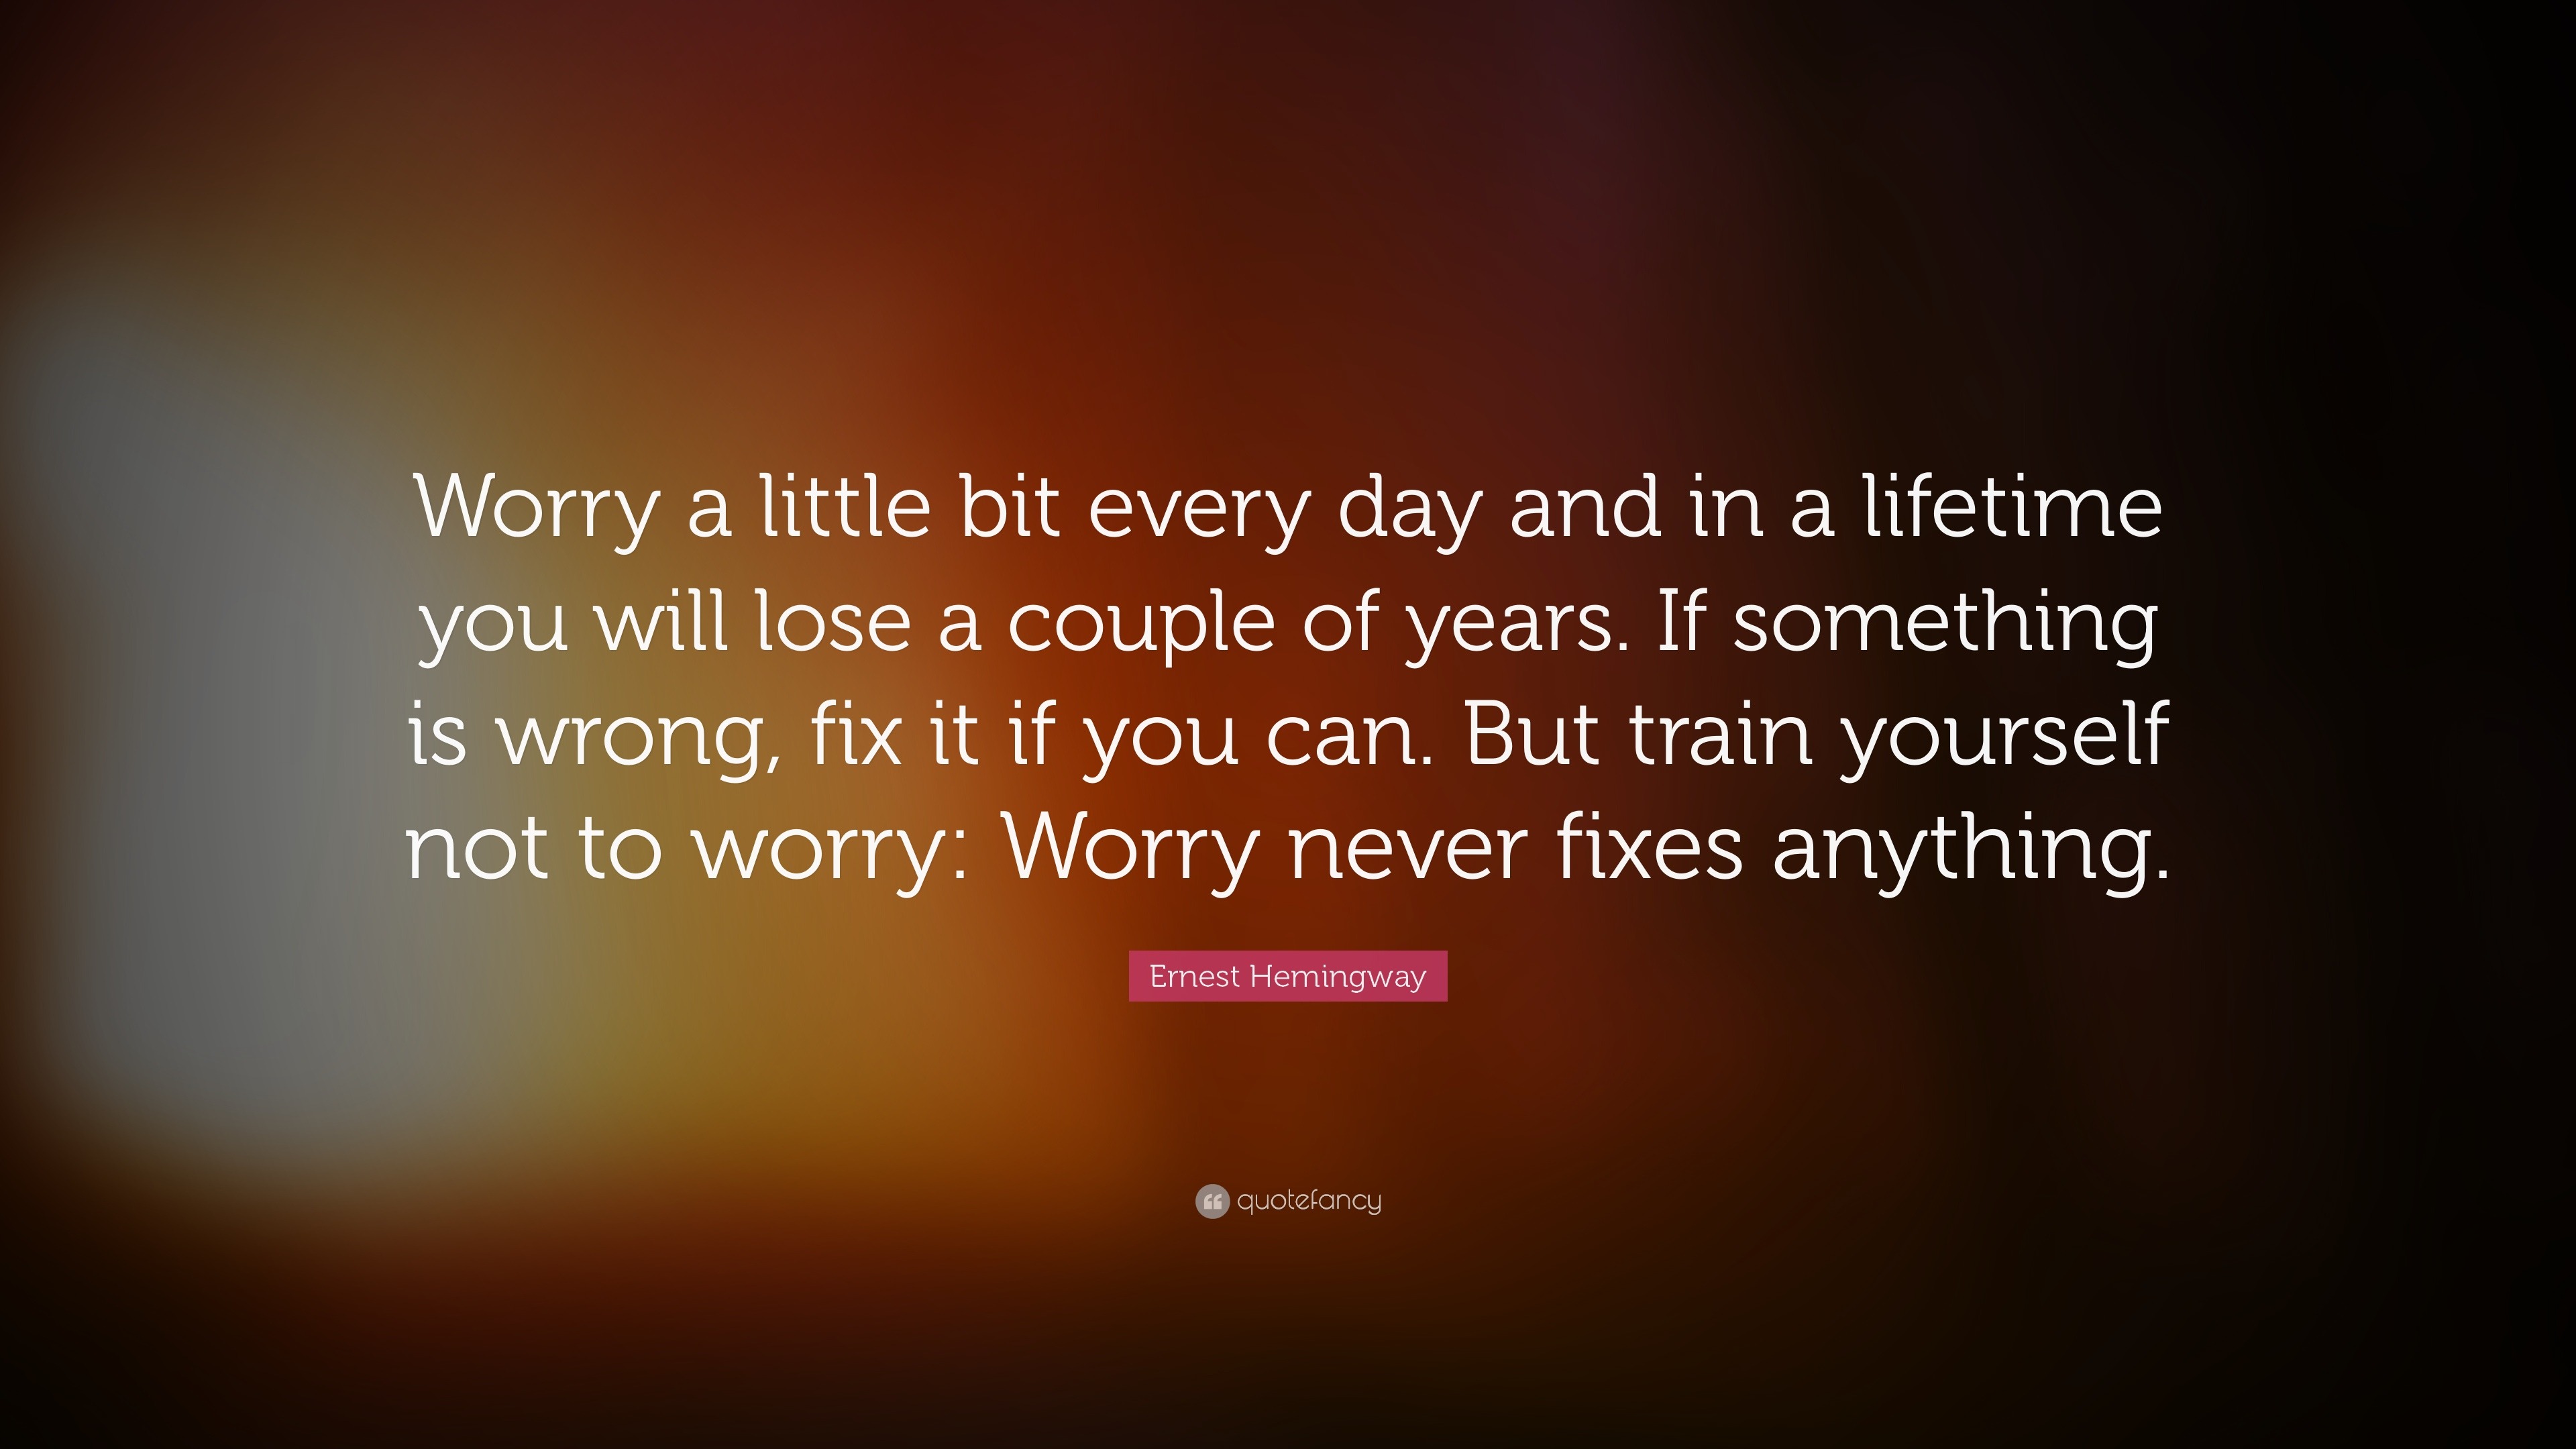 Ernest Hemingway Quote: “Worry a little bit every day and in a lifetime ...